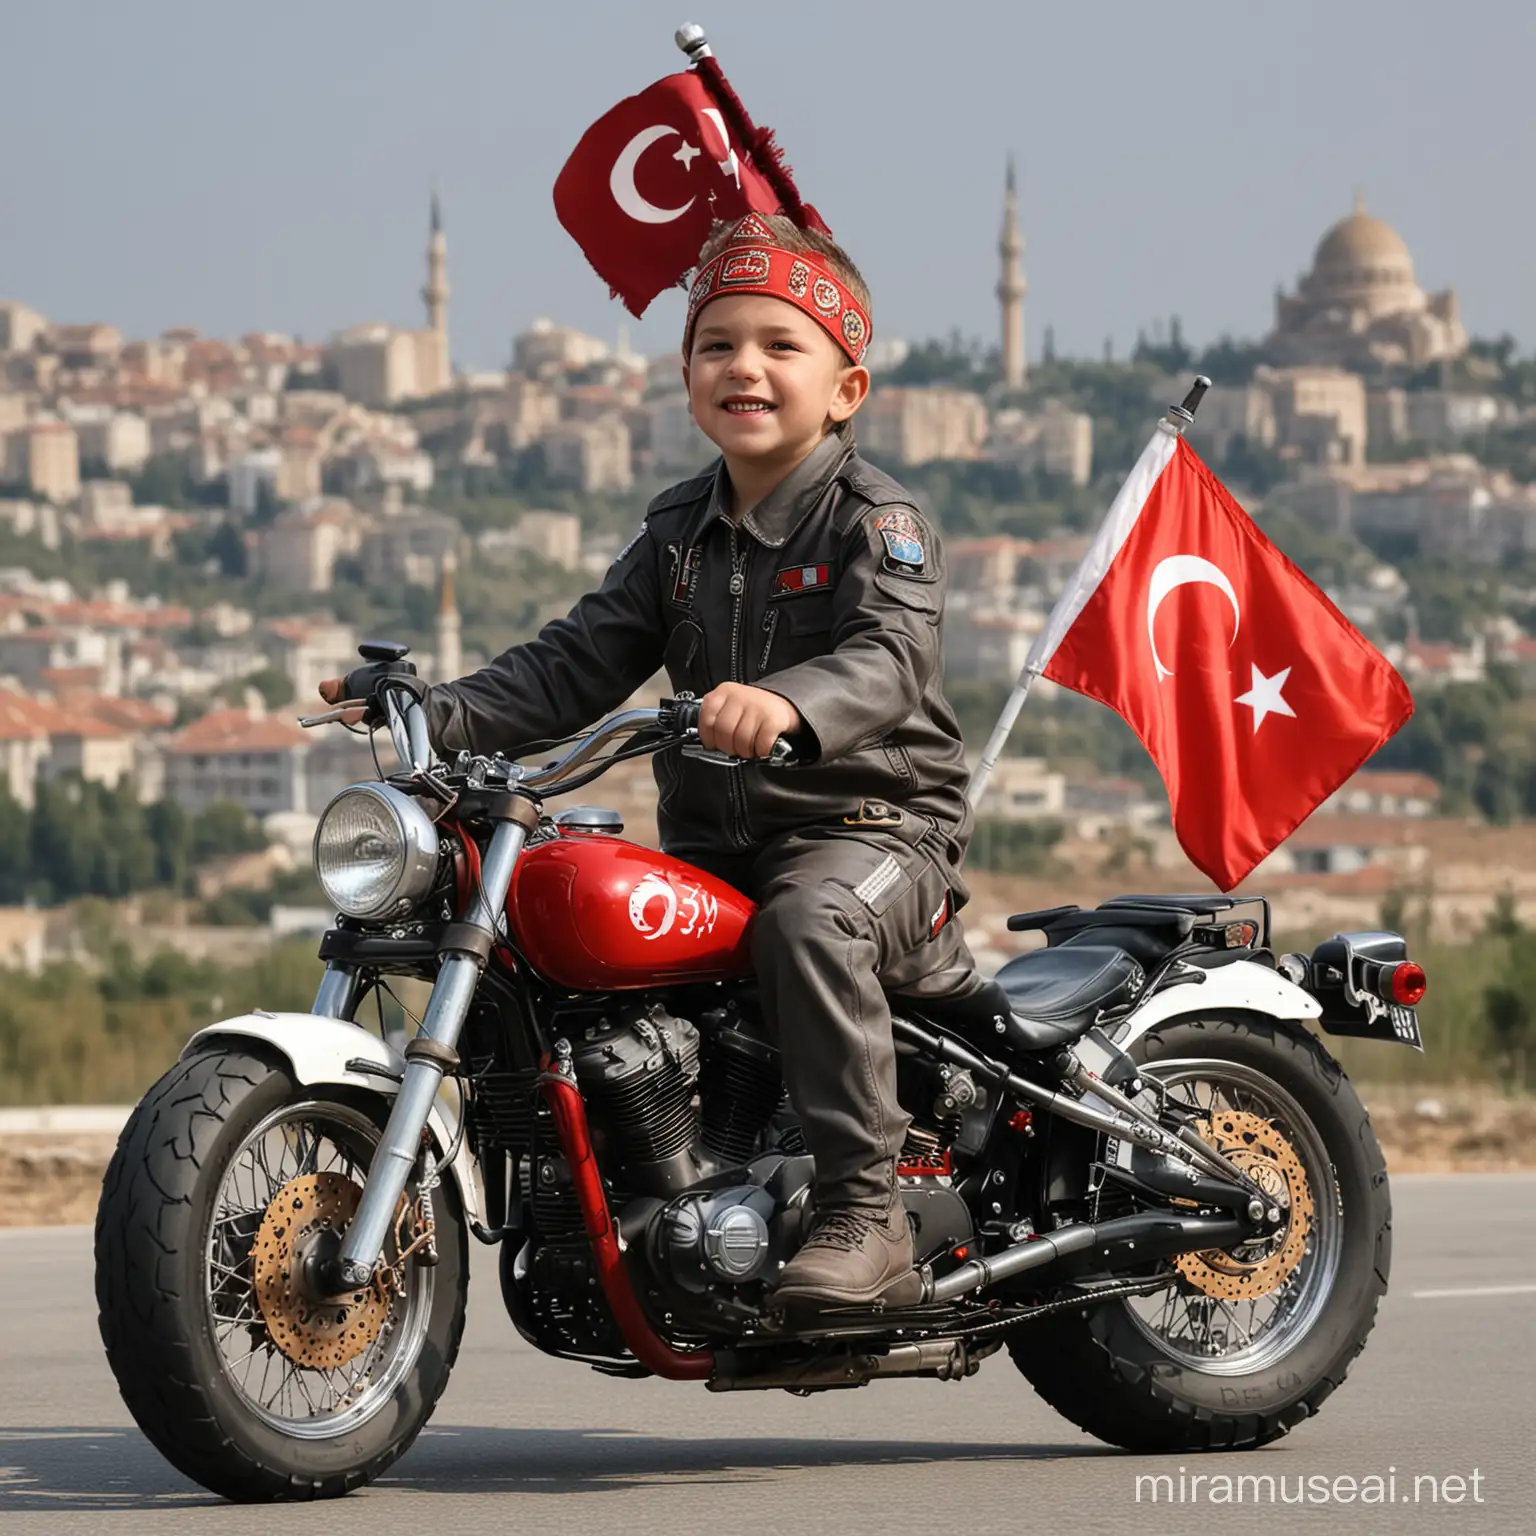 Celebrating 23 April National Sovereignty with Children Riding Motorcycles